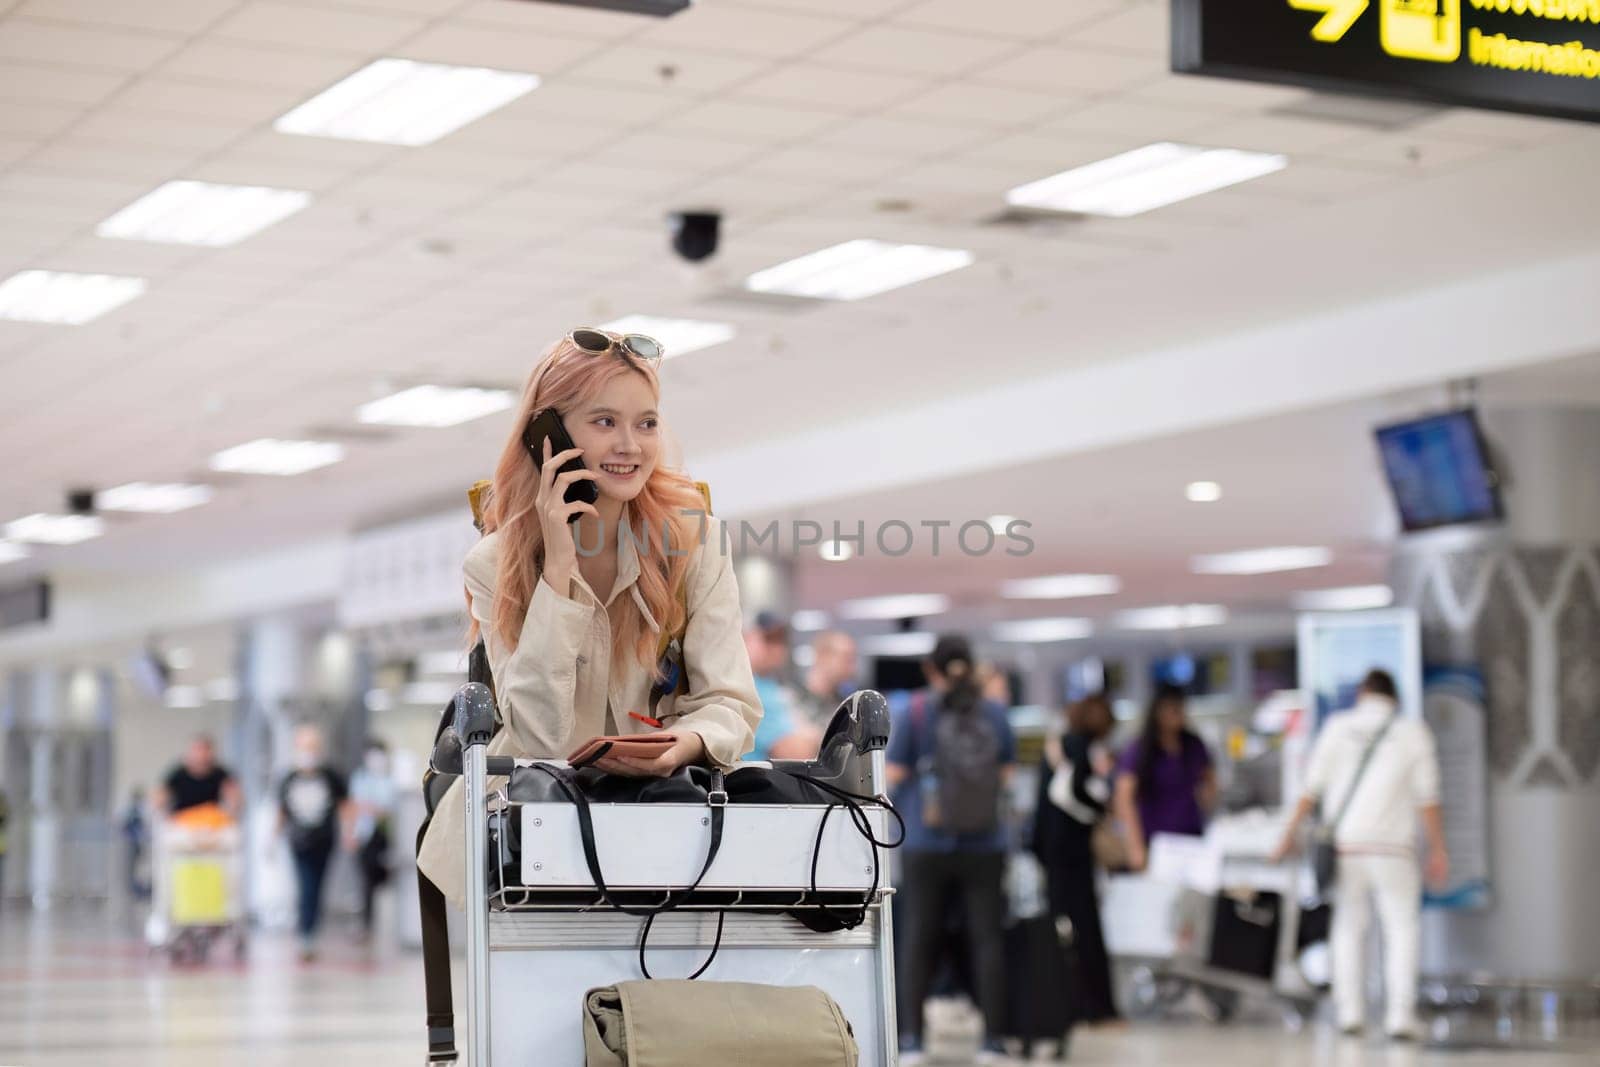 Young woman traveler with pink hair using phone in airport terminal.